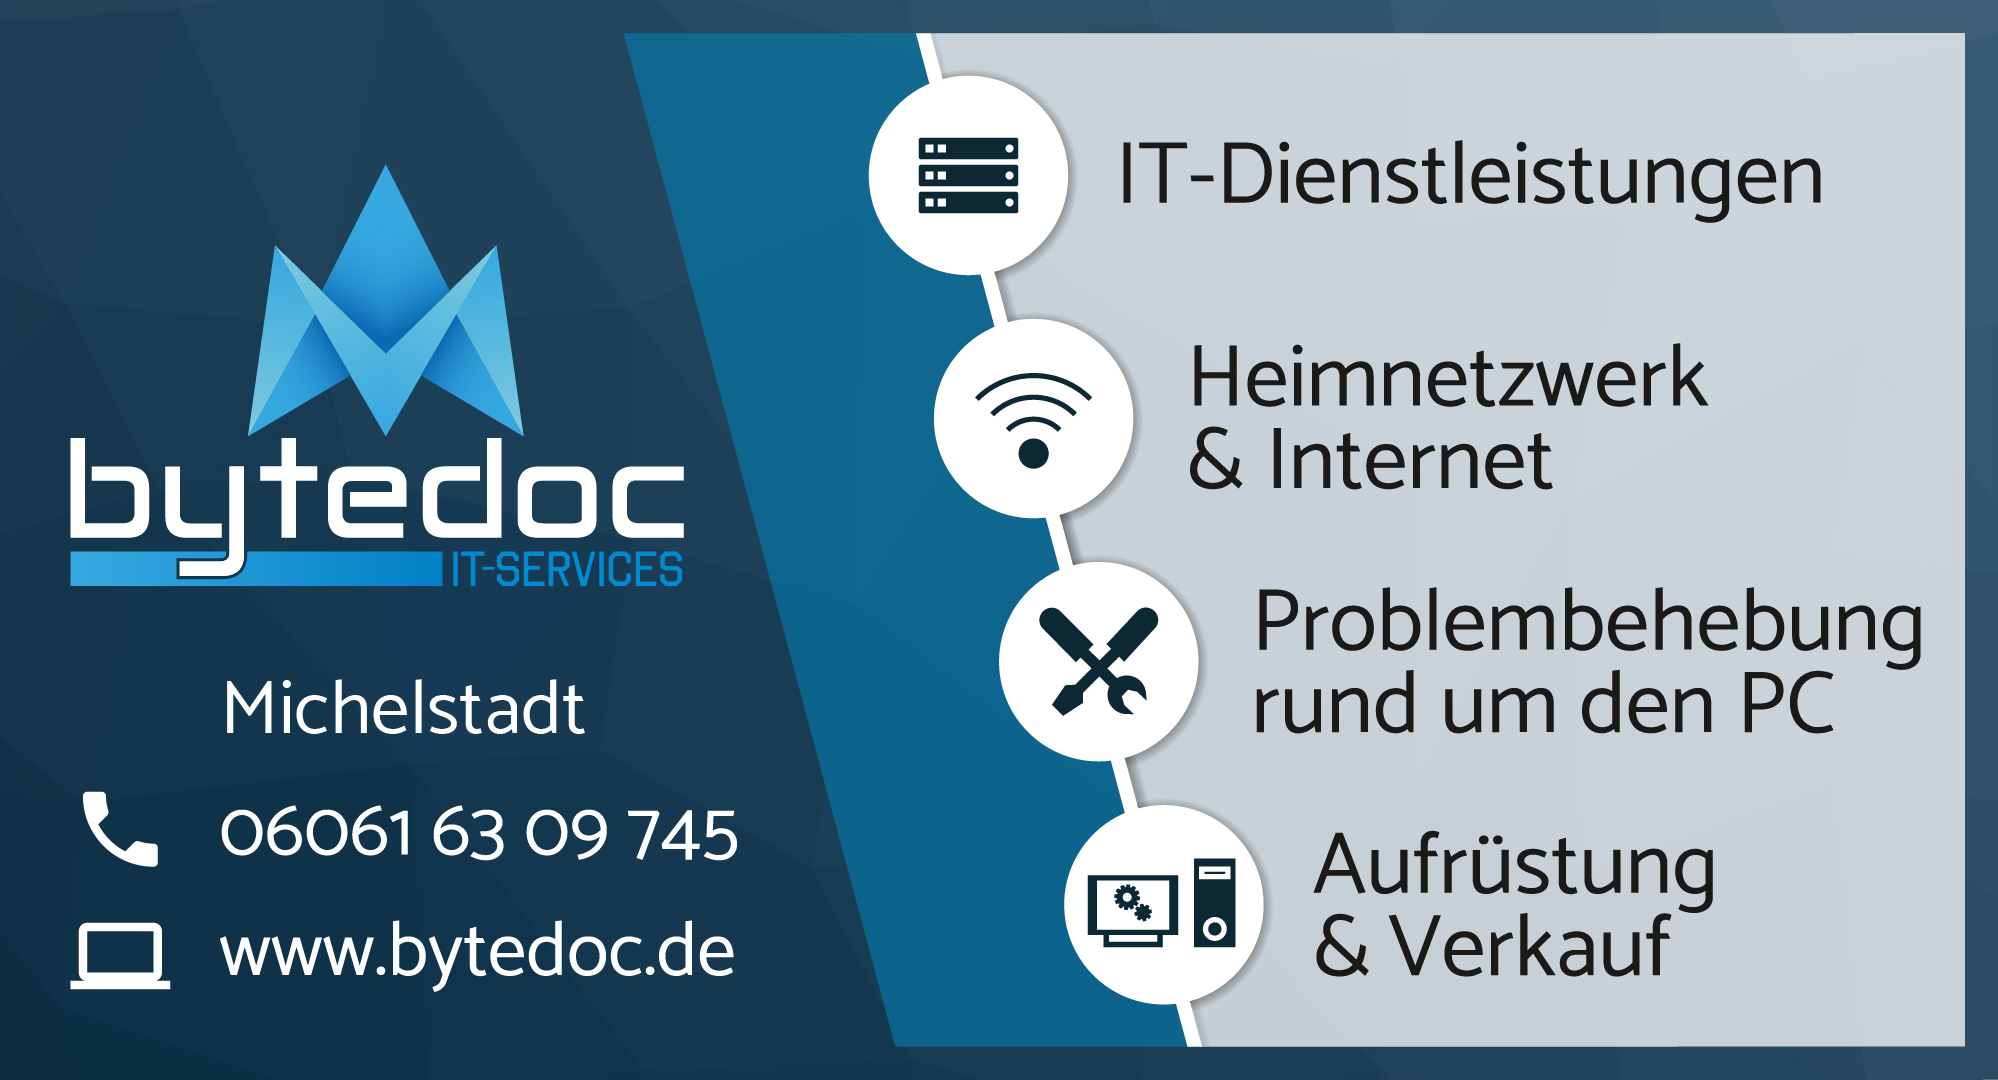 Bytedoc IT-Services